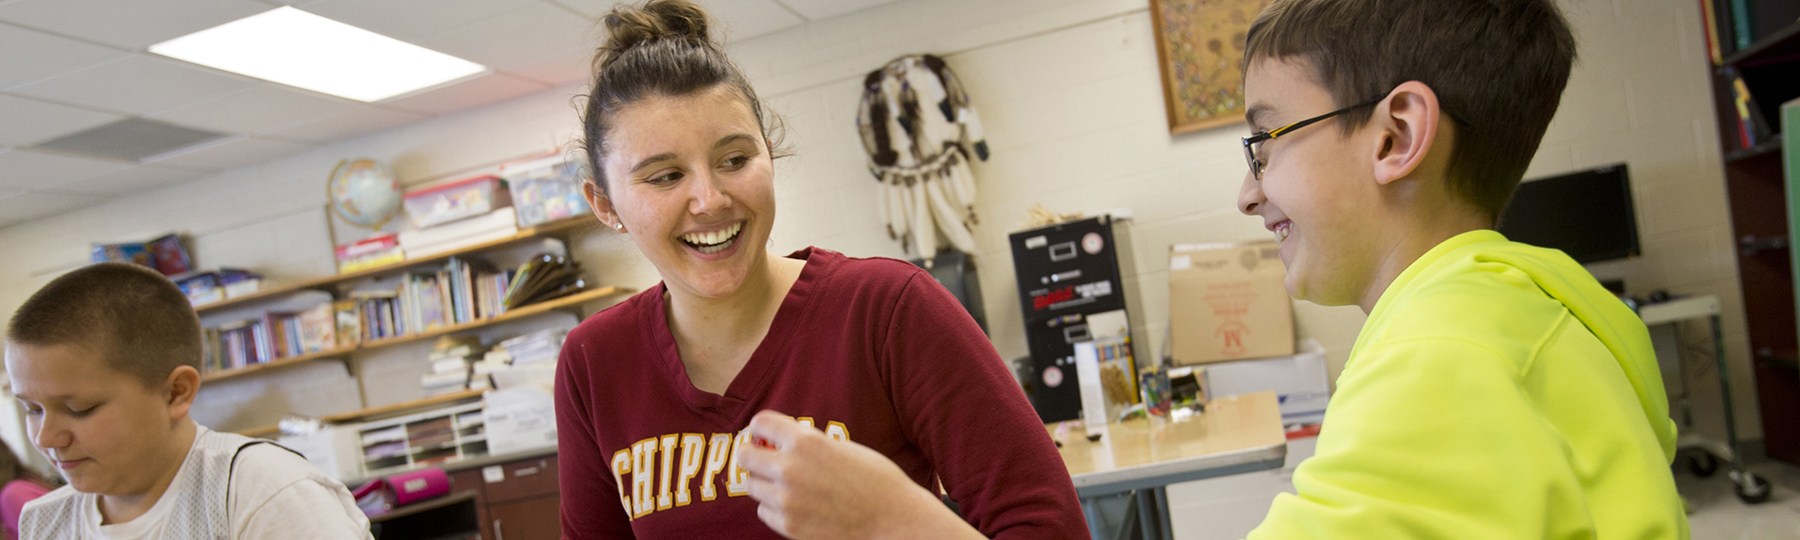 Central Michigan University student works with youth through a mentoring program